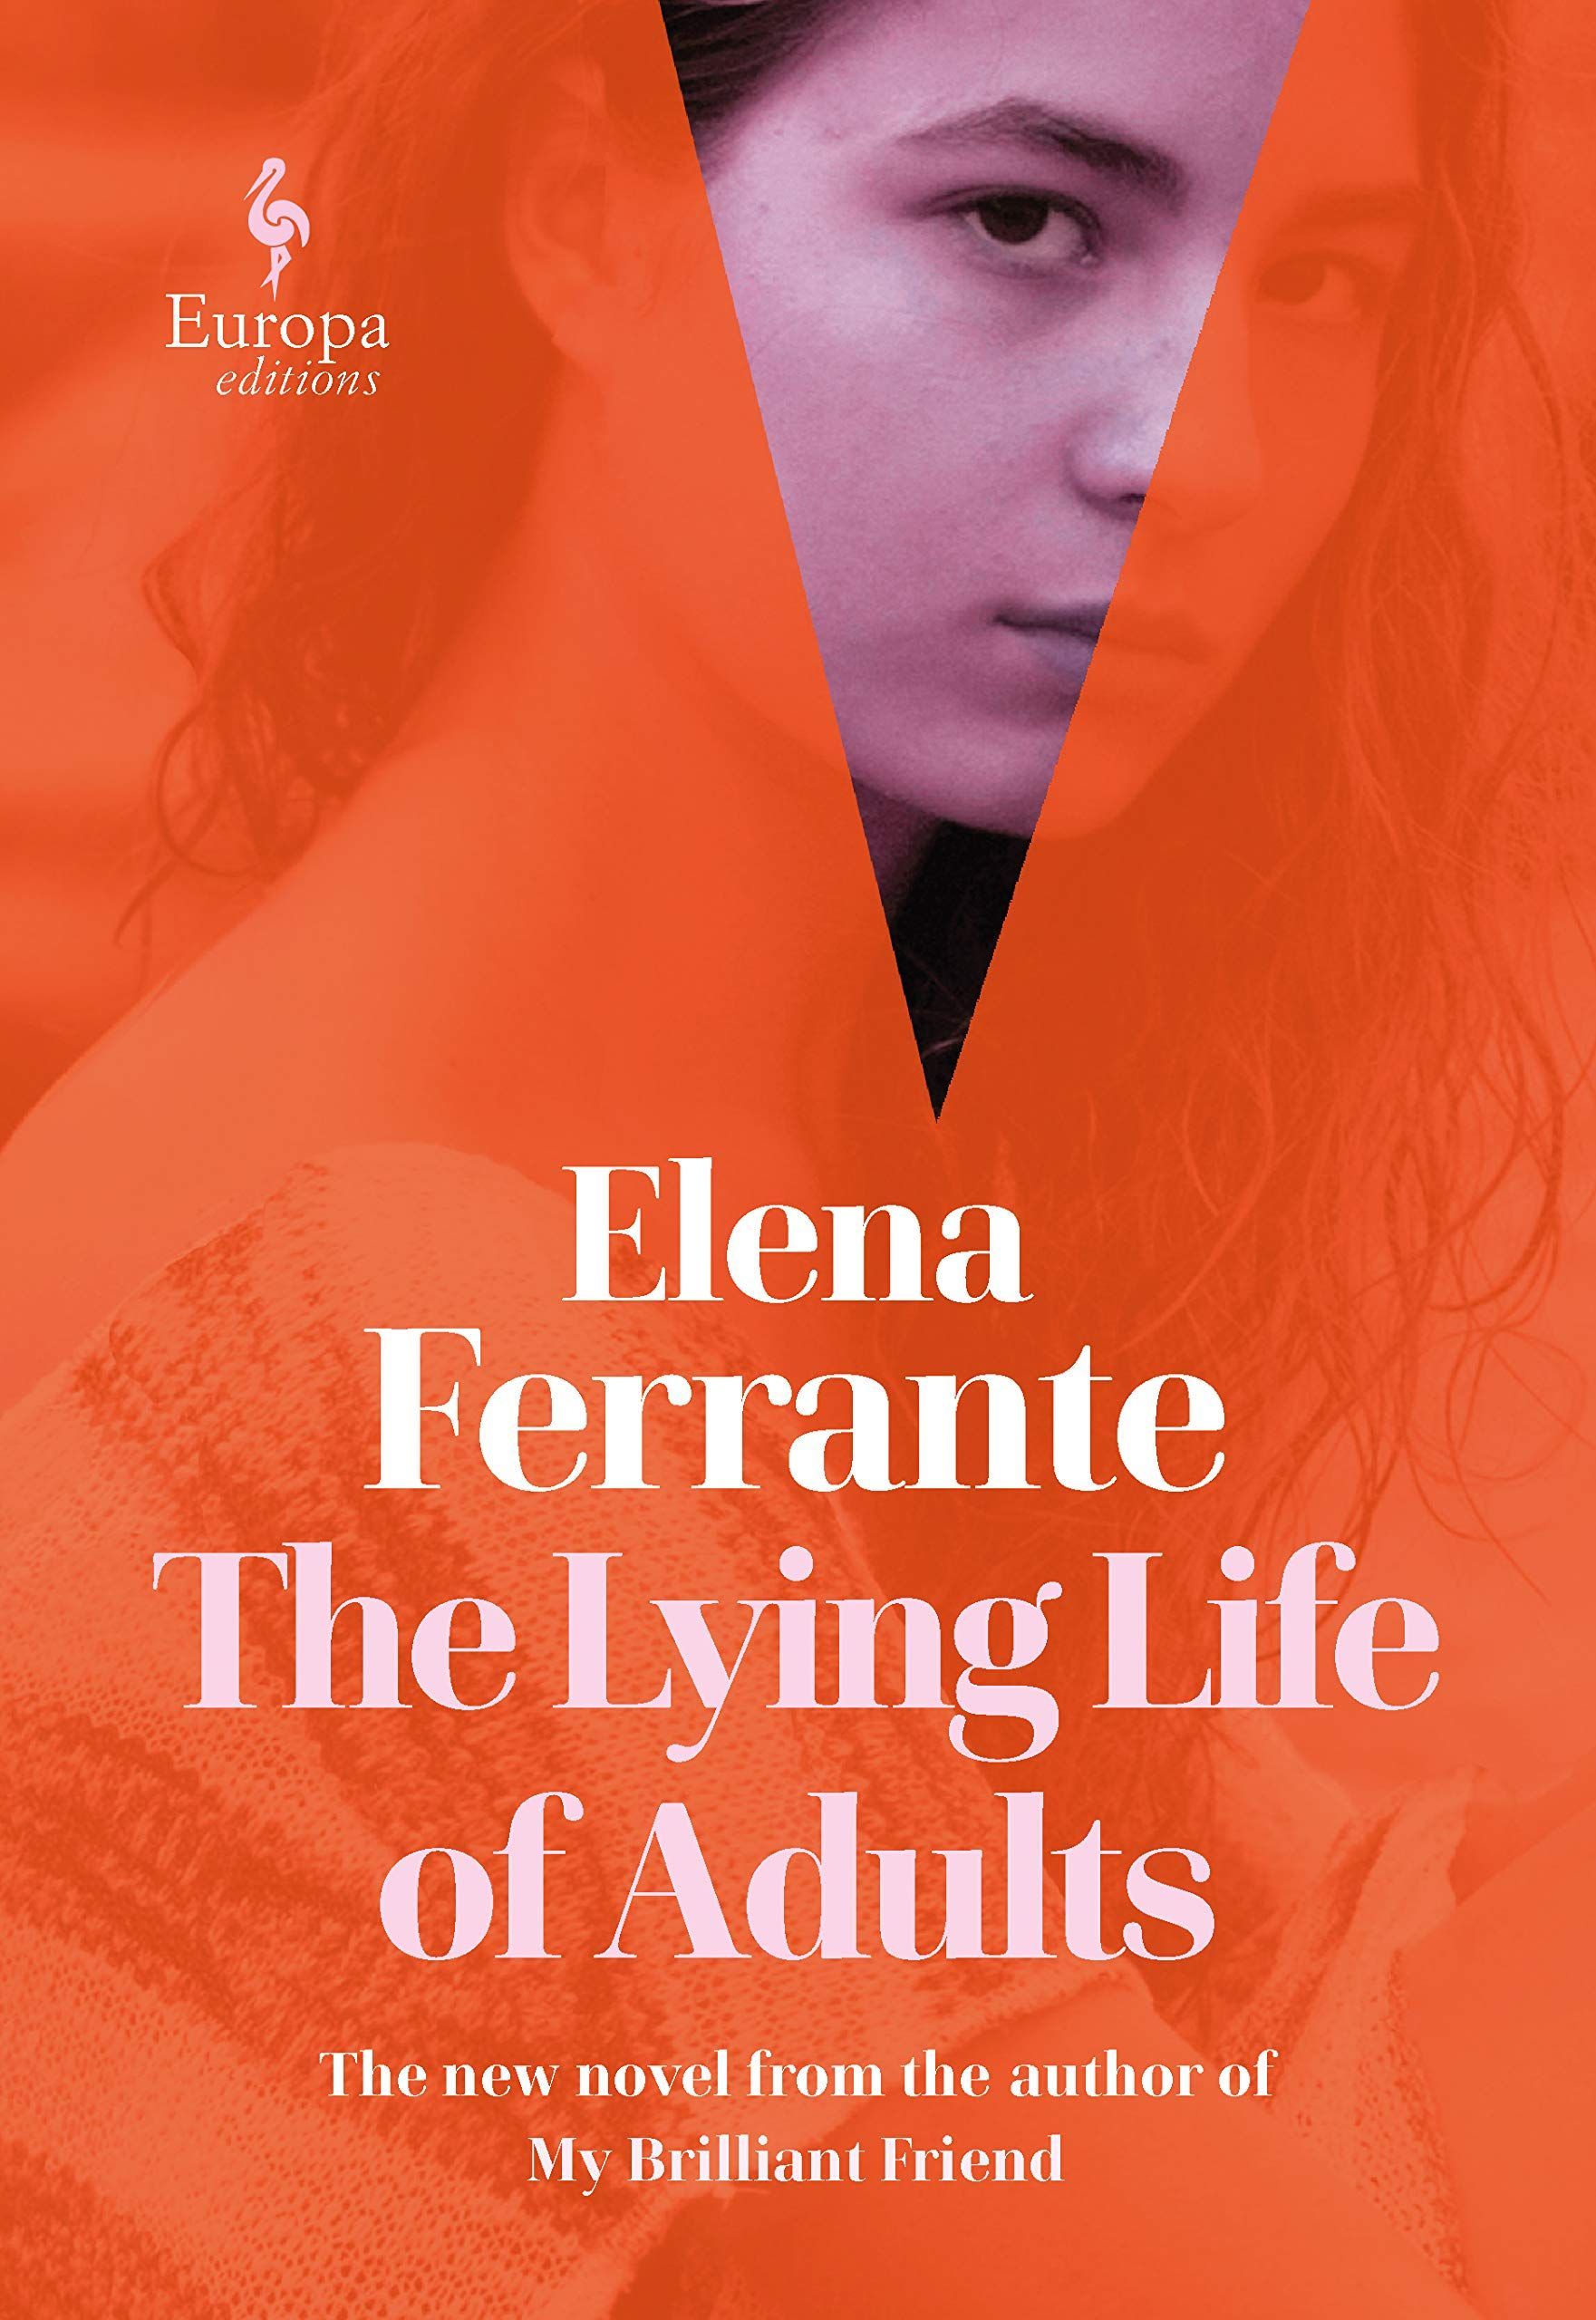 Sublimely Ugly: On Elena Ferrante’s “The Lying Life of Adults”